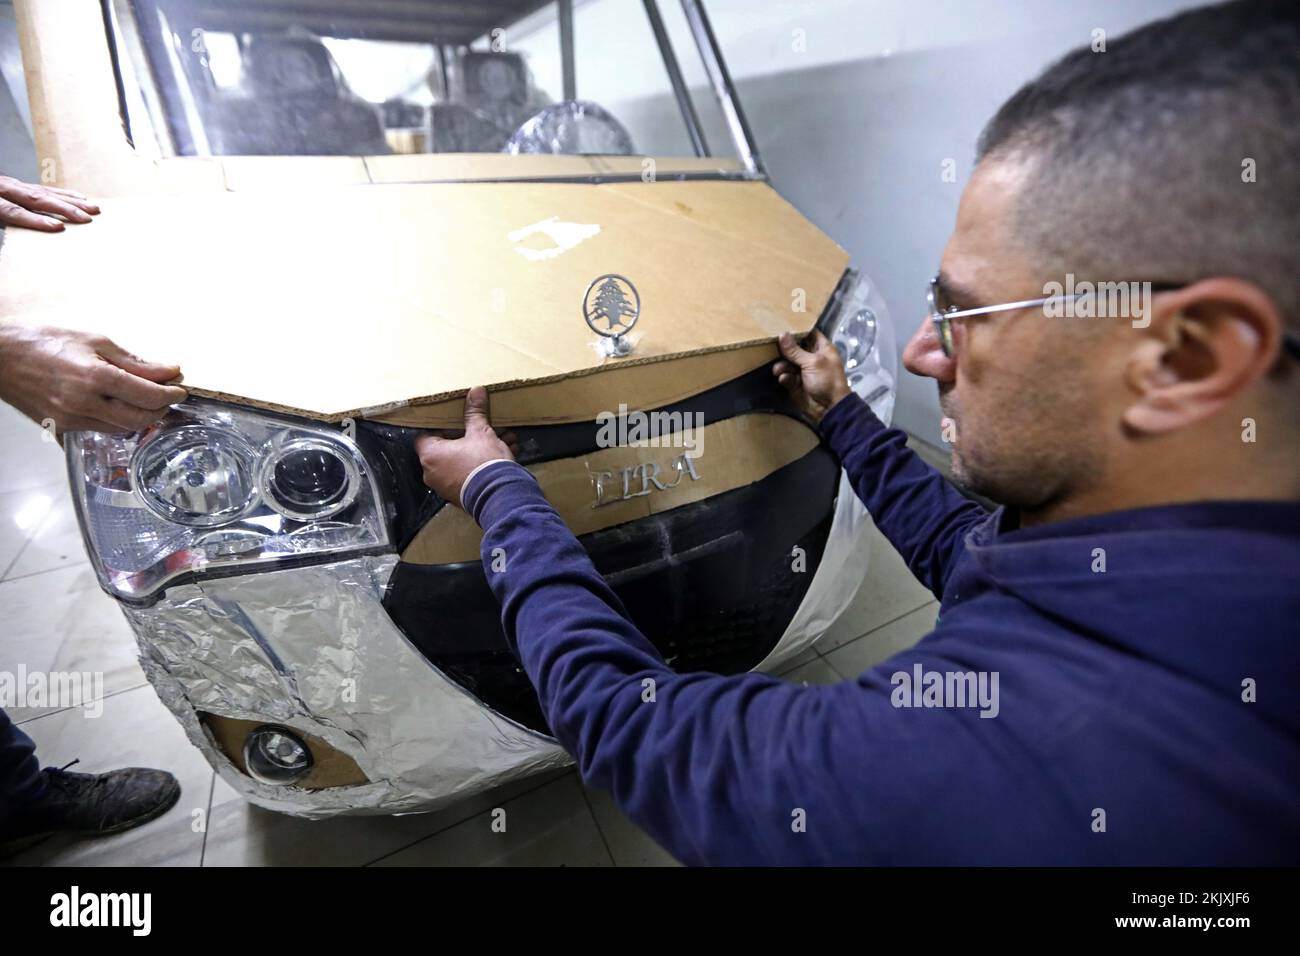 (221125) -- BEIRUT, Nov. 25, 2022 (Xinhua) -- A mechanic works on a hybrid vehicle designed by Hisham Houssami in Beirut, Lebanon, Nov. 21, 2022. TO GO WITH 'Feature: Lebanese invent new energy car to cope with energy crisis' (Xinhua/Bilal Jawich) Stock Photo